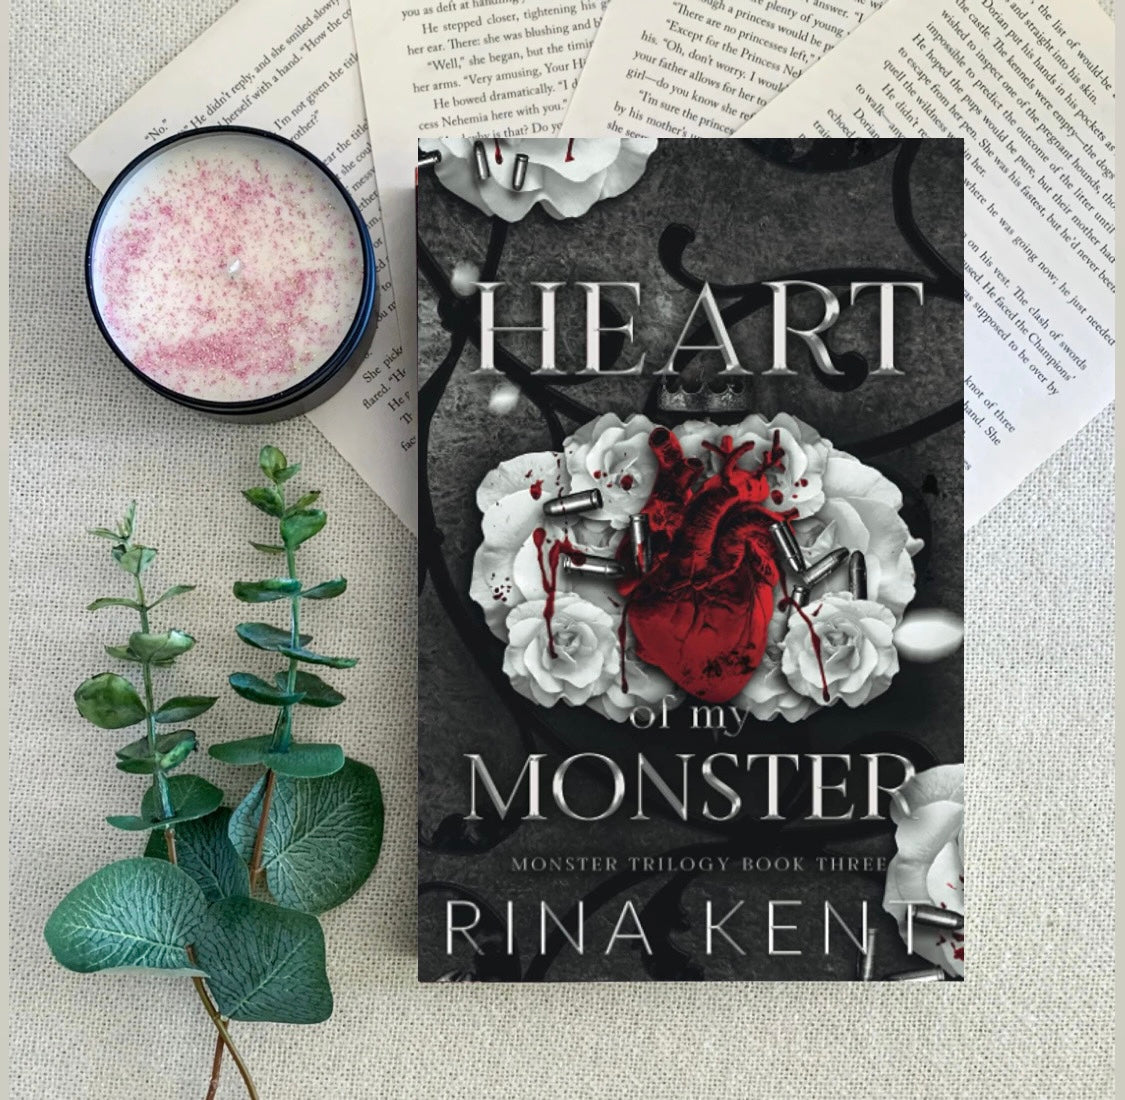 Monster Trilogy (Special Edition) by Rina Kent